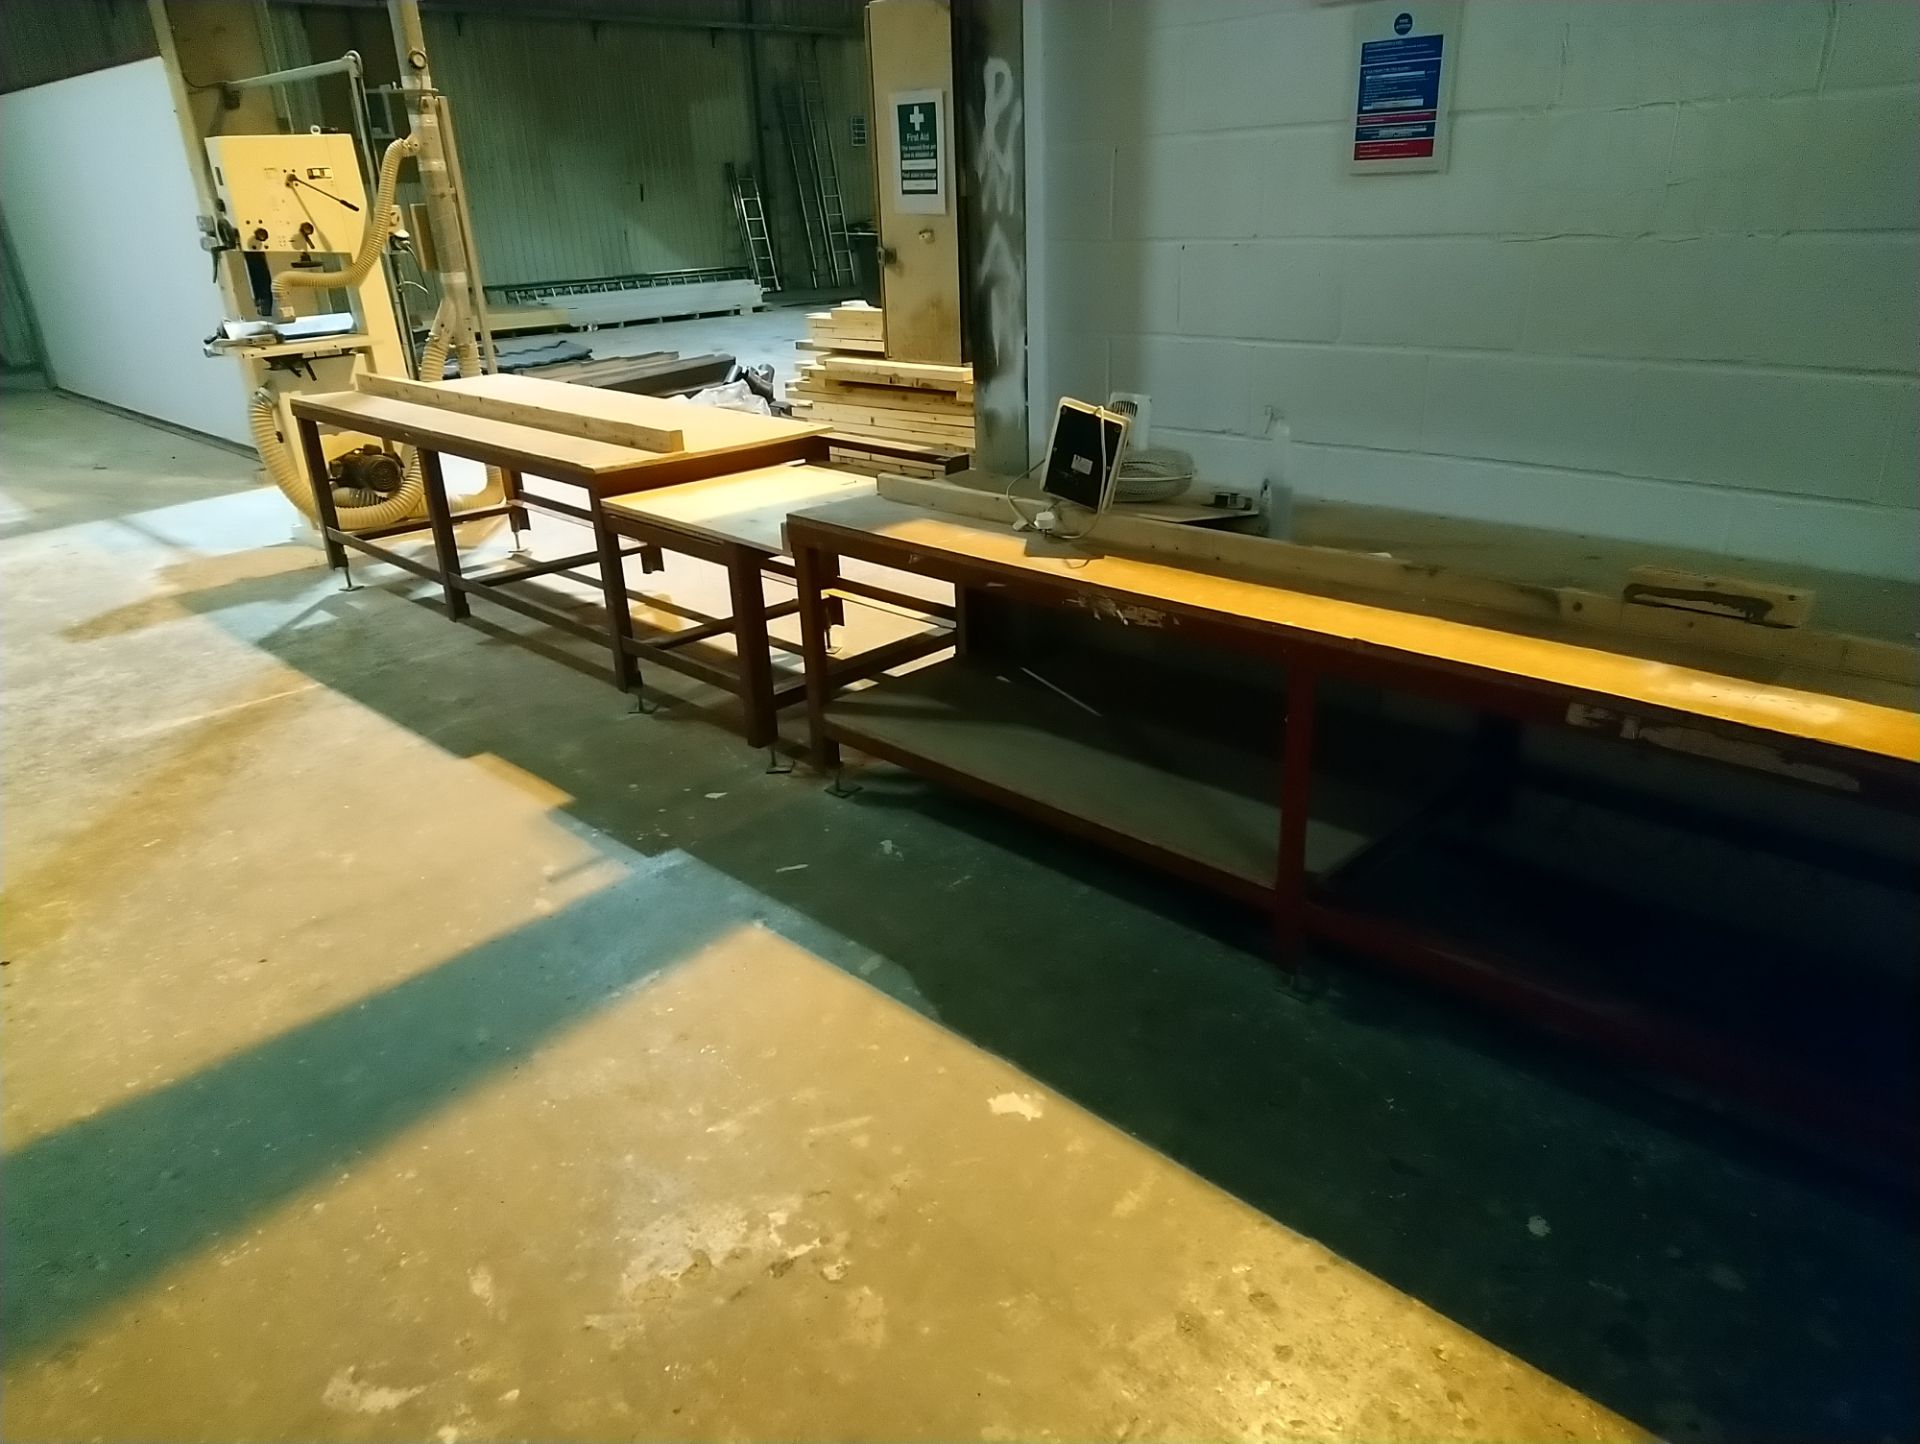 Metal framed work bench with wooden top (0.92m x 6.